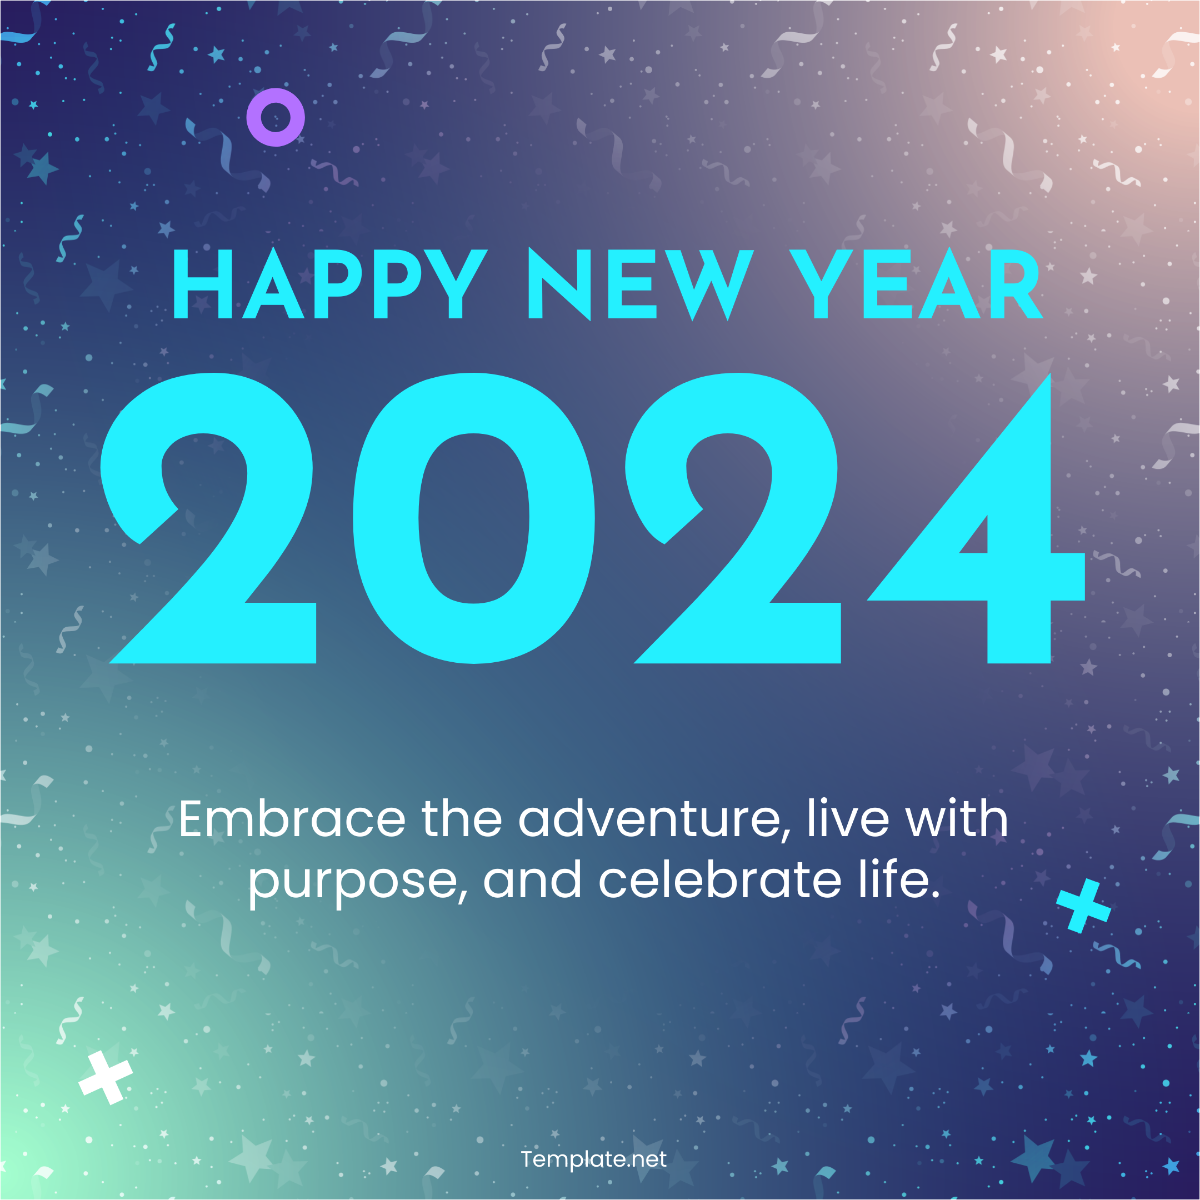 FREE New Year 2024 Templates & Examples Edit Online & Download